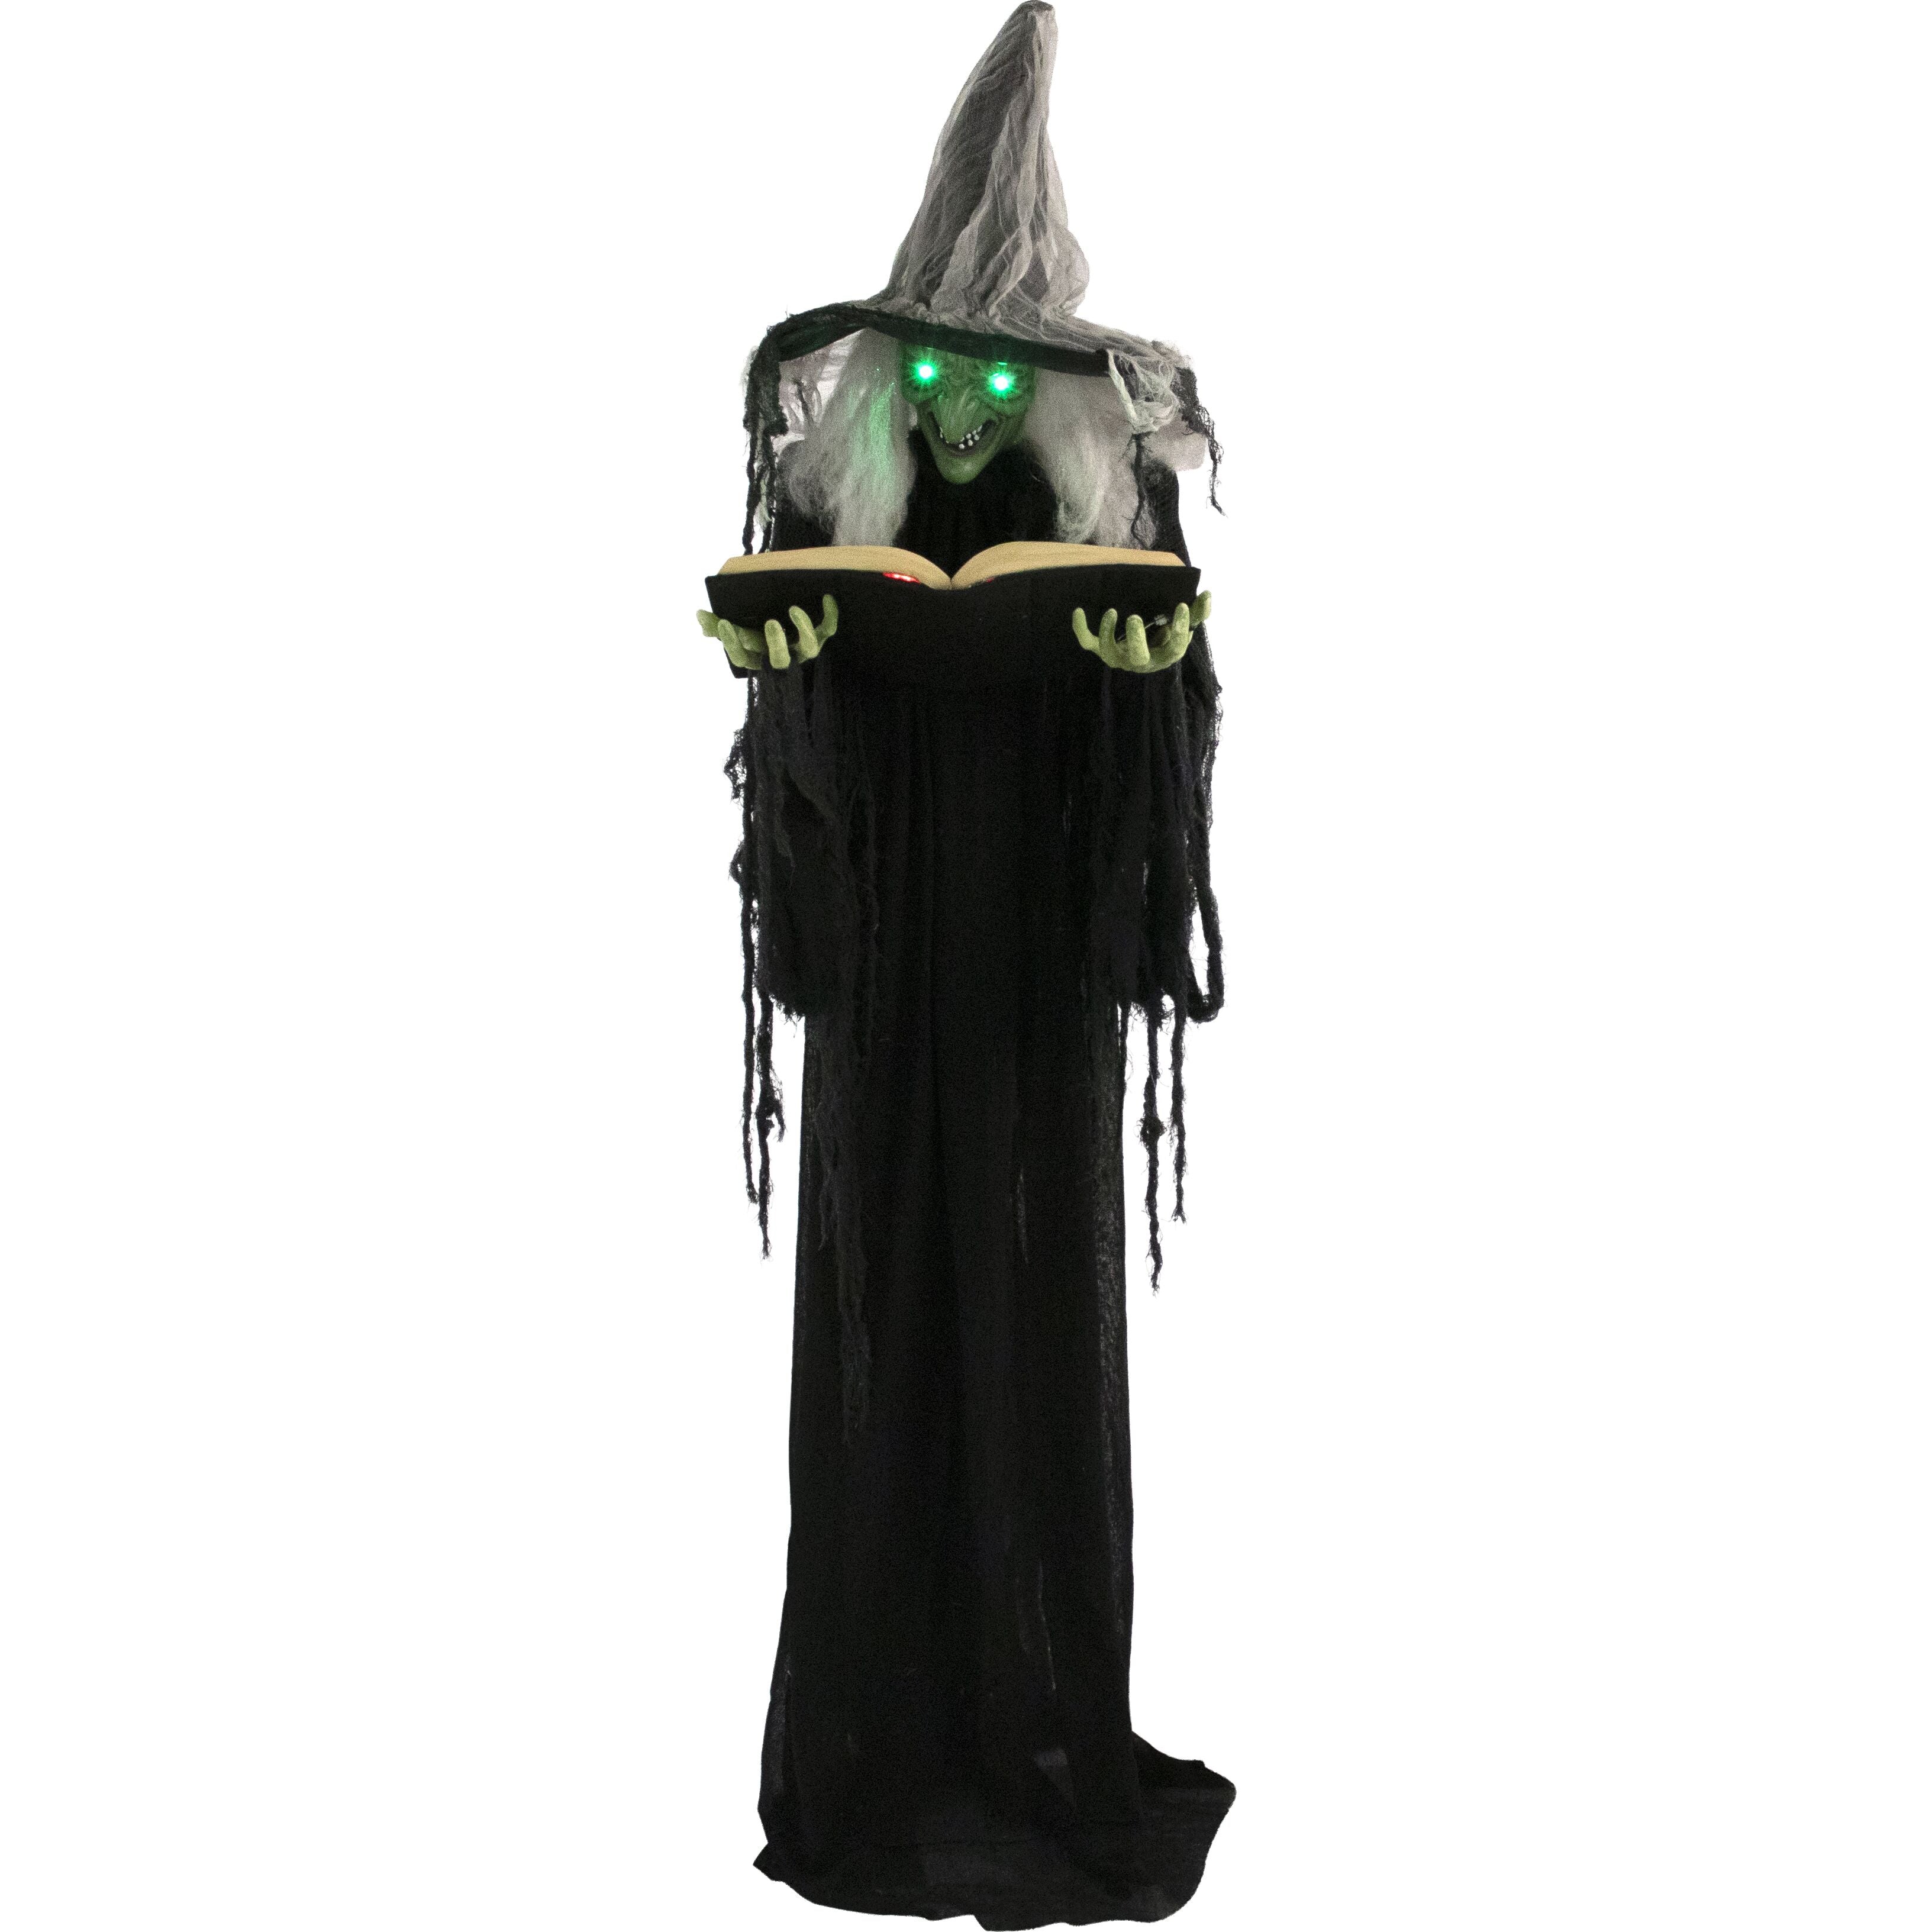 Haunted Hill Farm -  Life-Size Animatronic Witch, Indoor/Outdoor Halloween Decoration, Light-up Green Eyes, Talking